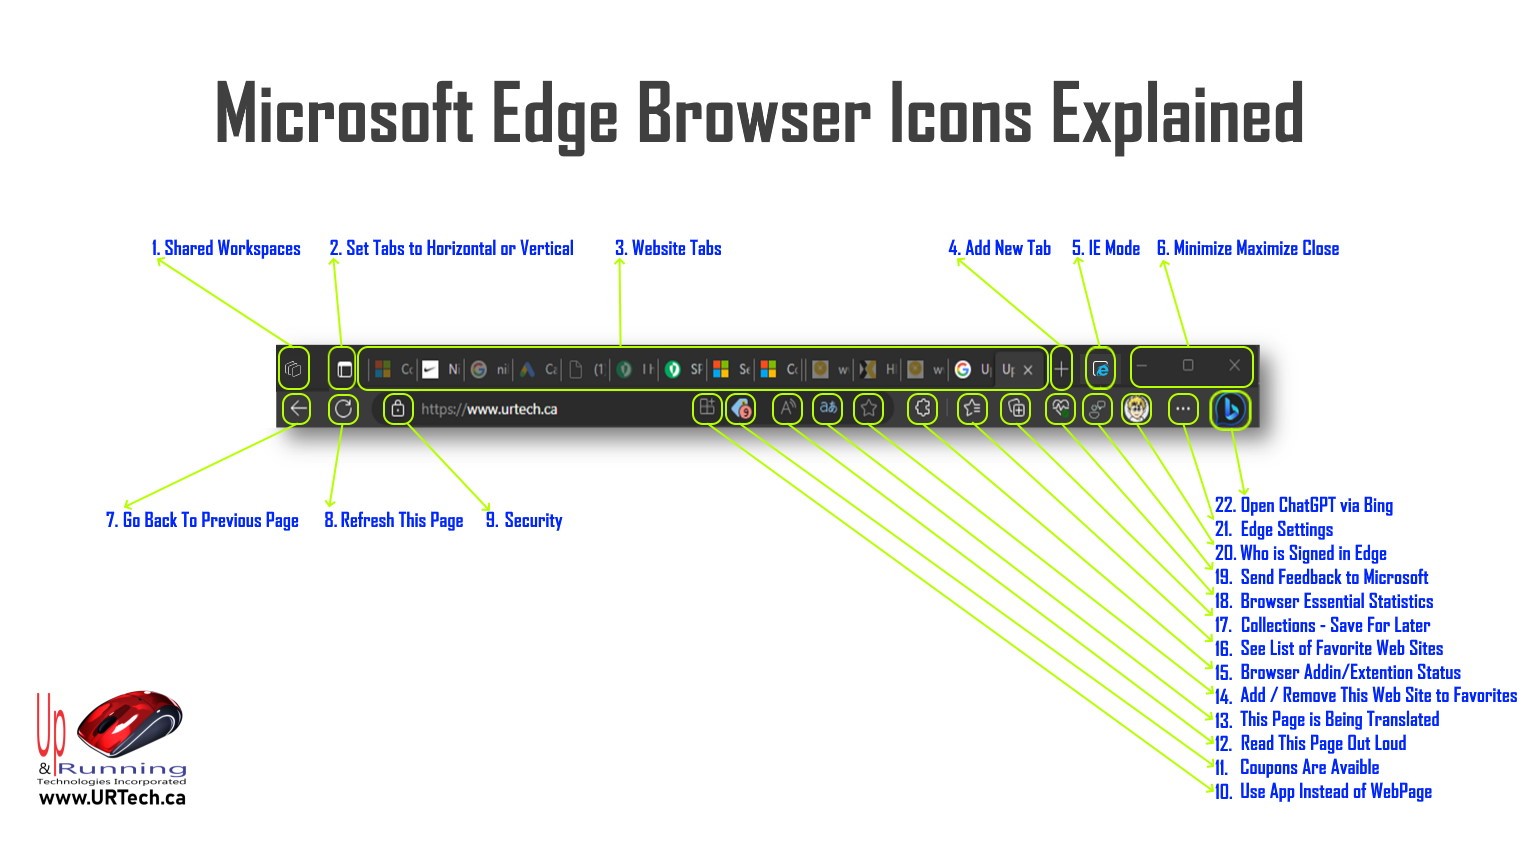 SOLVED: What's That Icon On Microsoft Edge Browser?